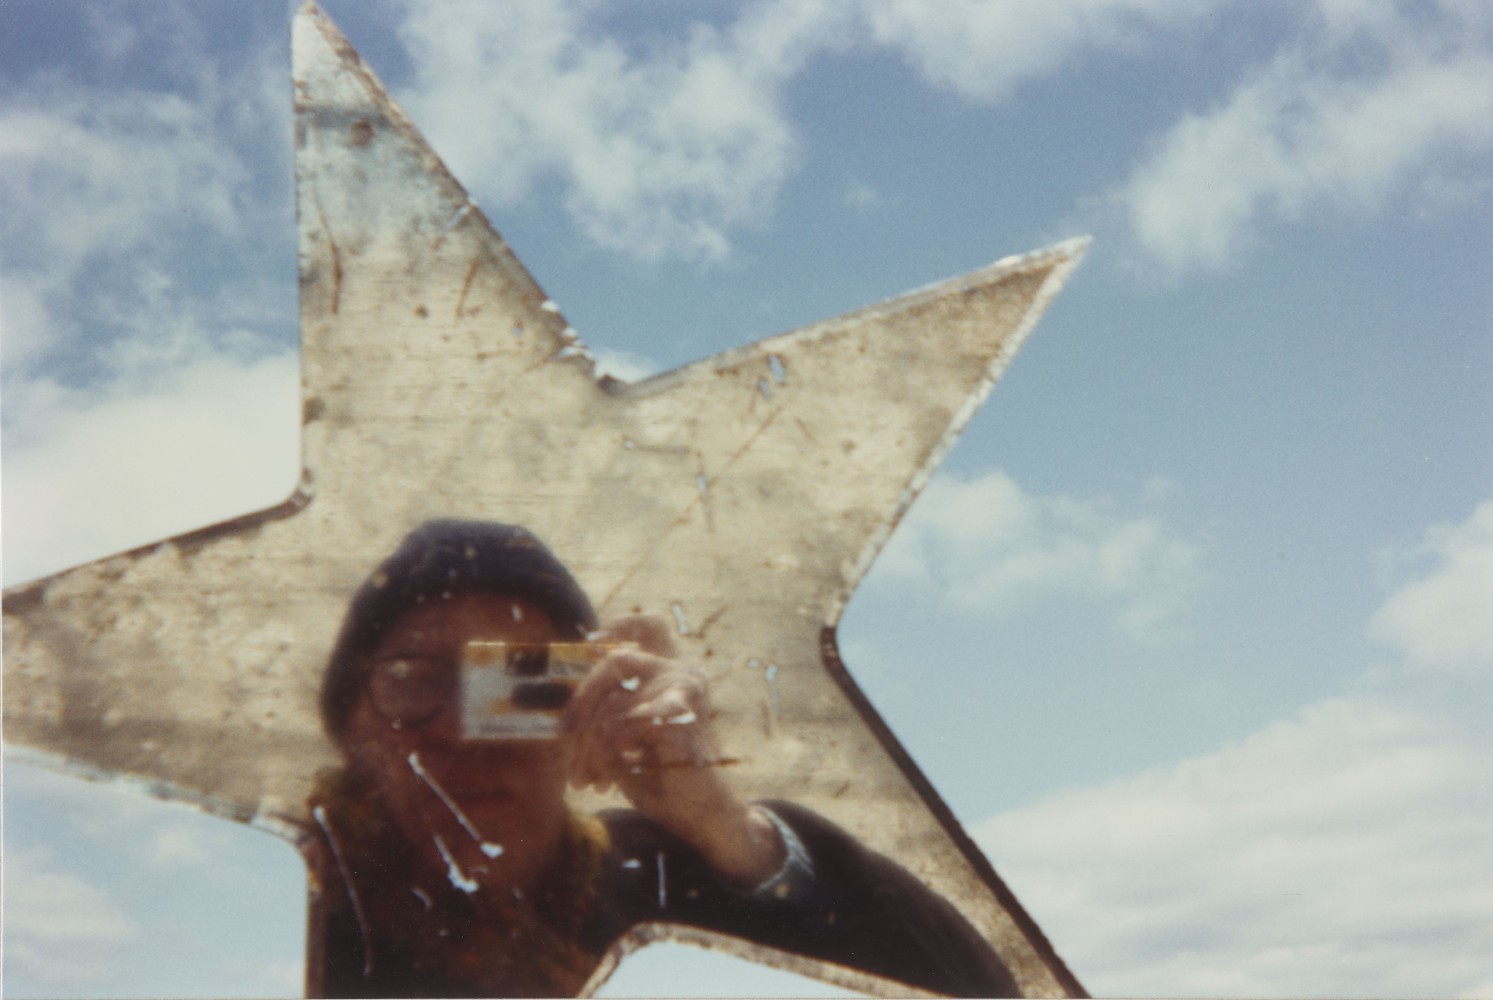 Ray Johnson,&amp;nbsp;Untitled (Self Portrait in Star),&amp;nbsp;circa 1992-94,&amp;nbsp;Commercially processed chromogenic print, 6 &amp;times; 4 in., The Morgan Library &amp;amp; Museum